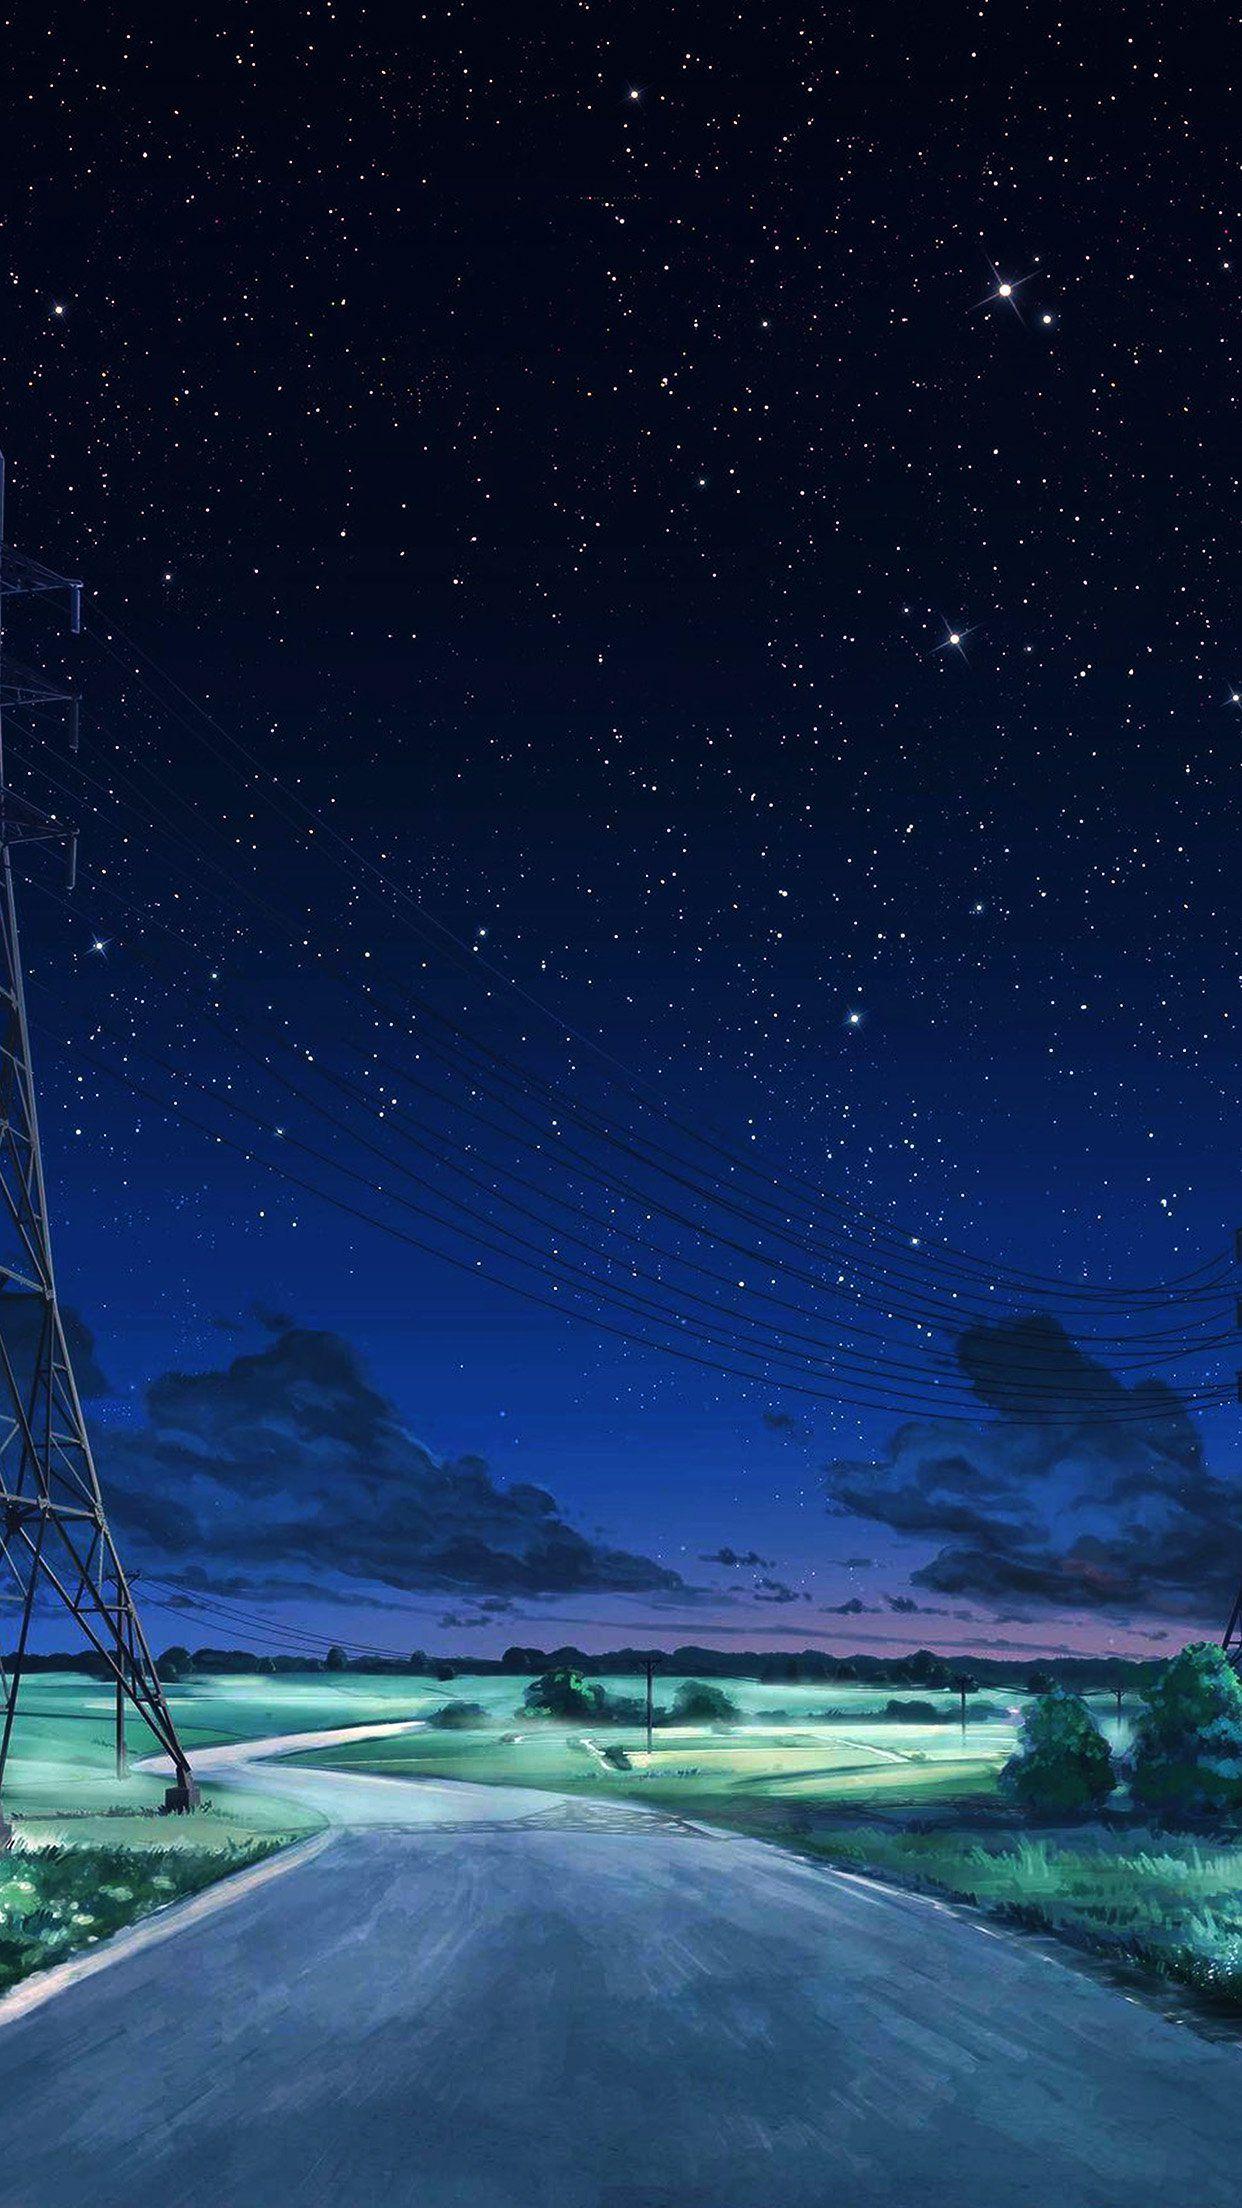 For those who wanted the Live Wallpaper of kimi no na wa, I wanted it also  so i decided to make it as close as possible to the one shown in the